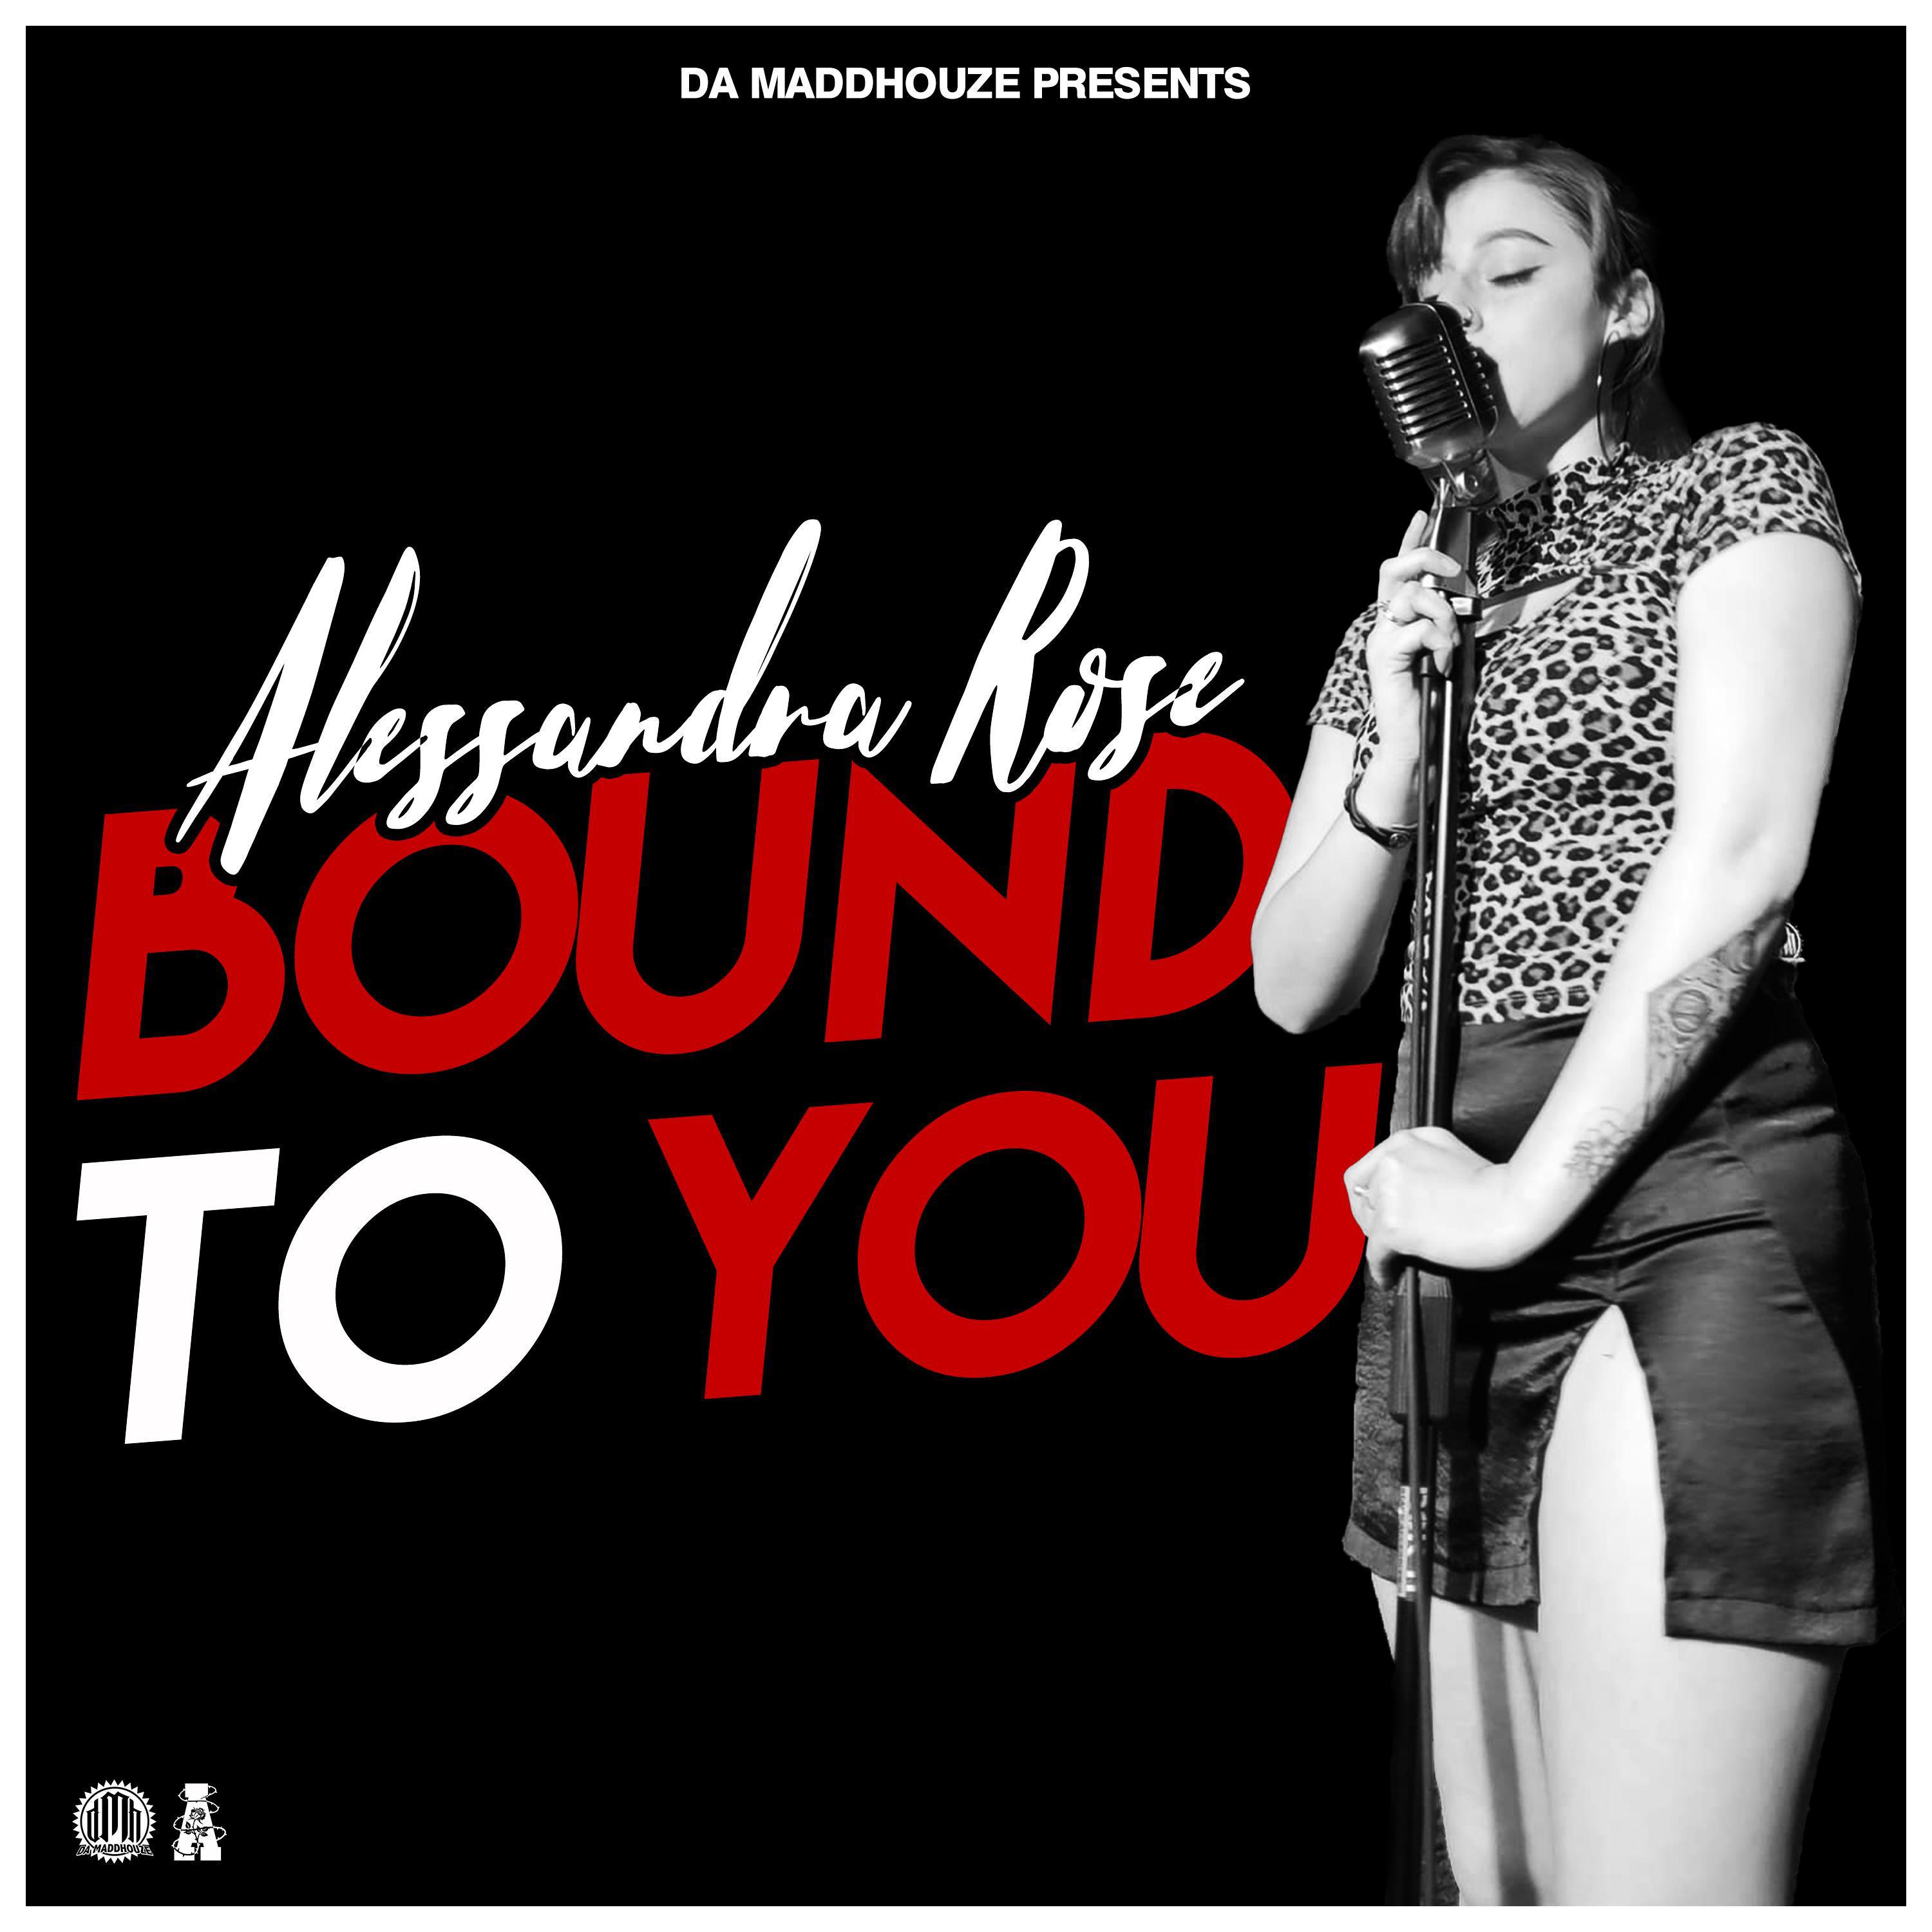 Alessandra Rose - Bound to You